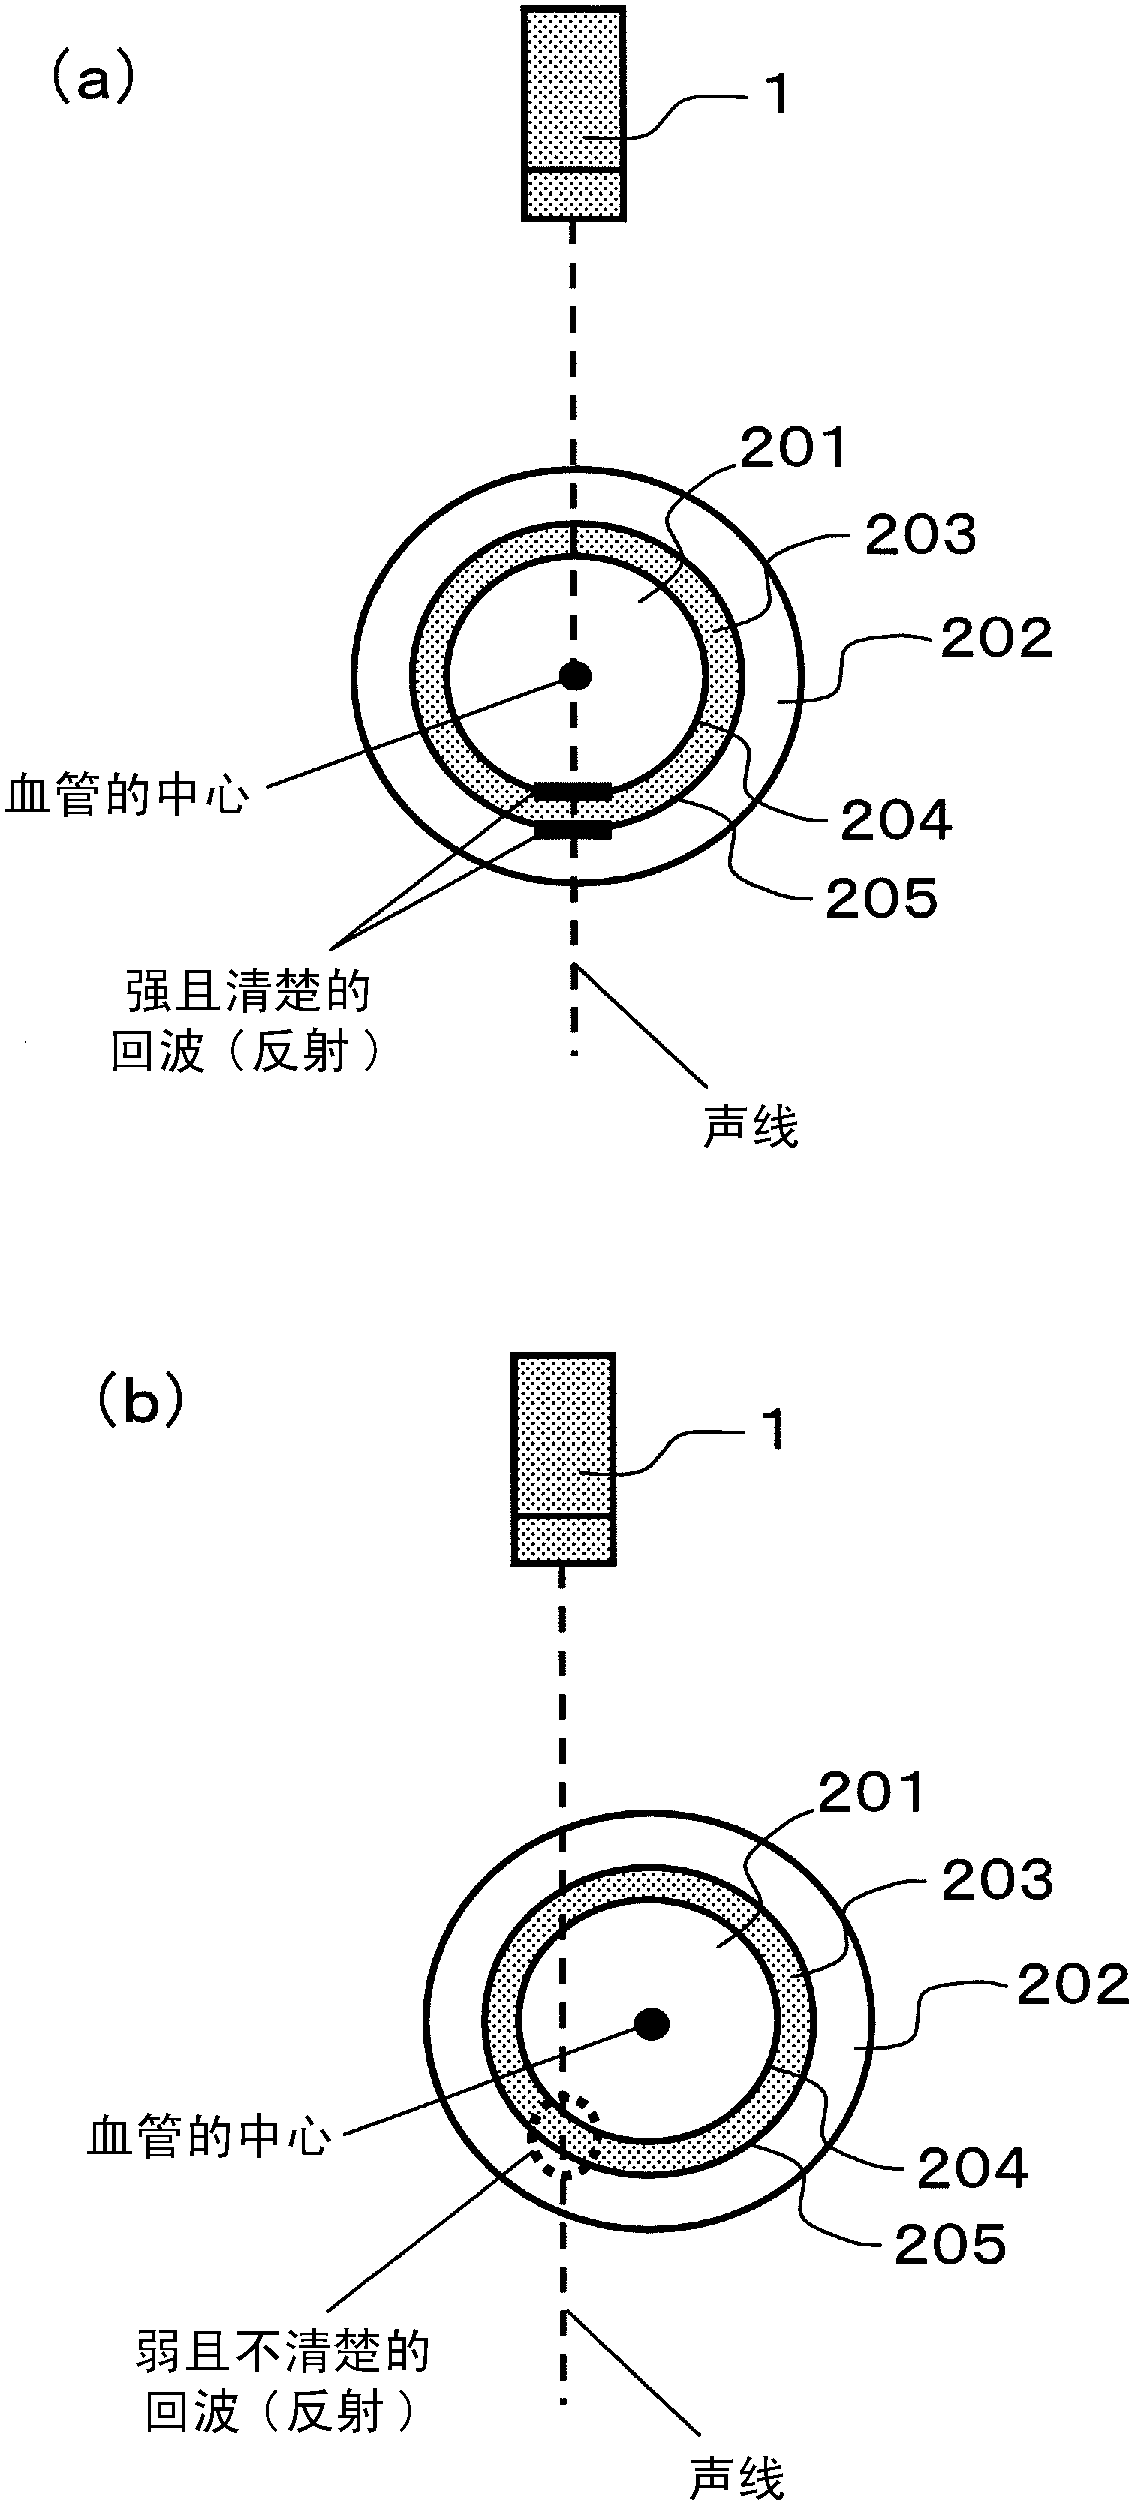 Ultrasound diagnostic apparatus and ultrasound diagnostic apparatus control method